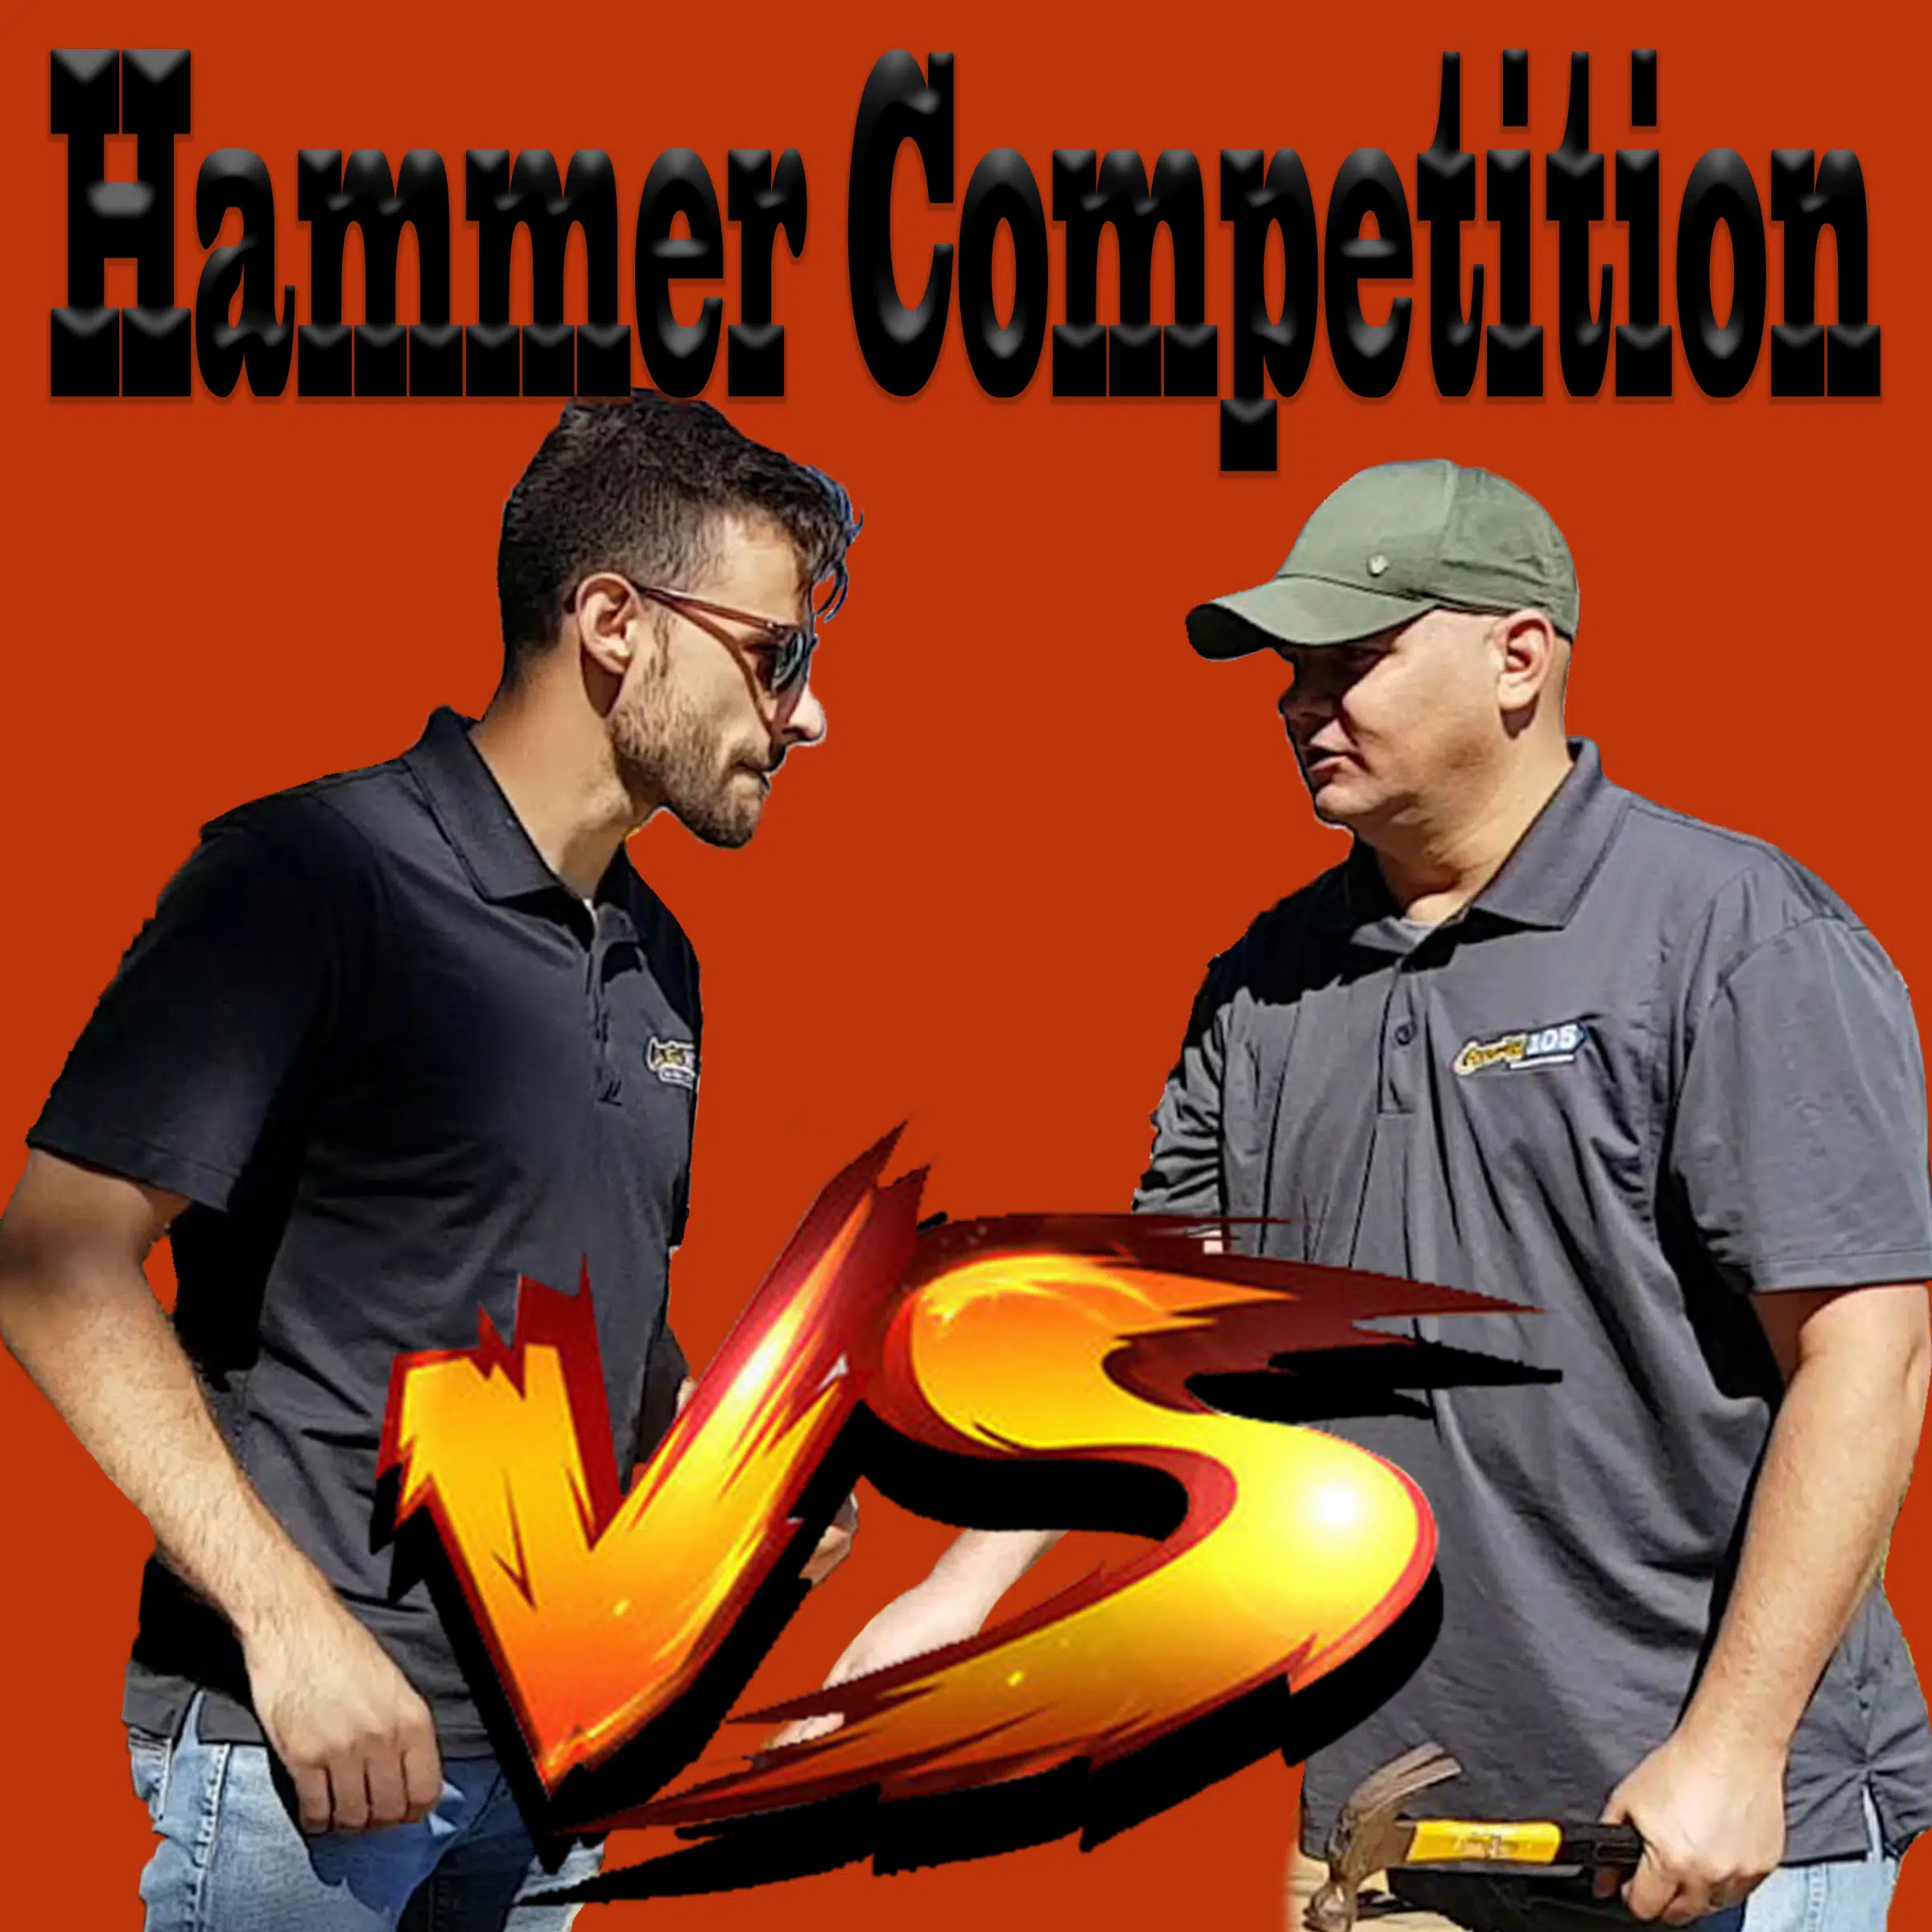 Hammer Contest: Andy Vs Trent